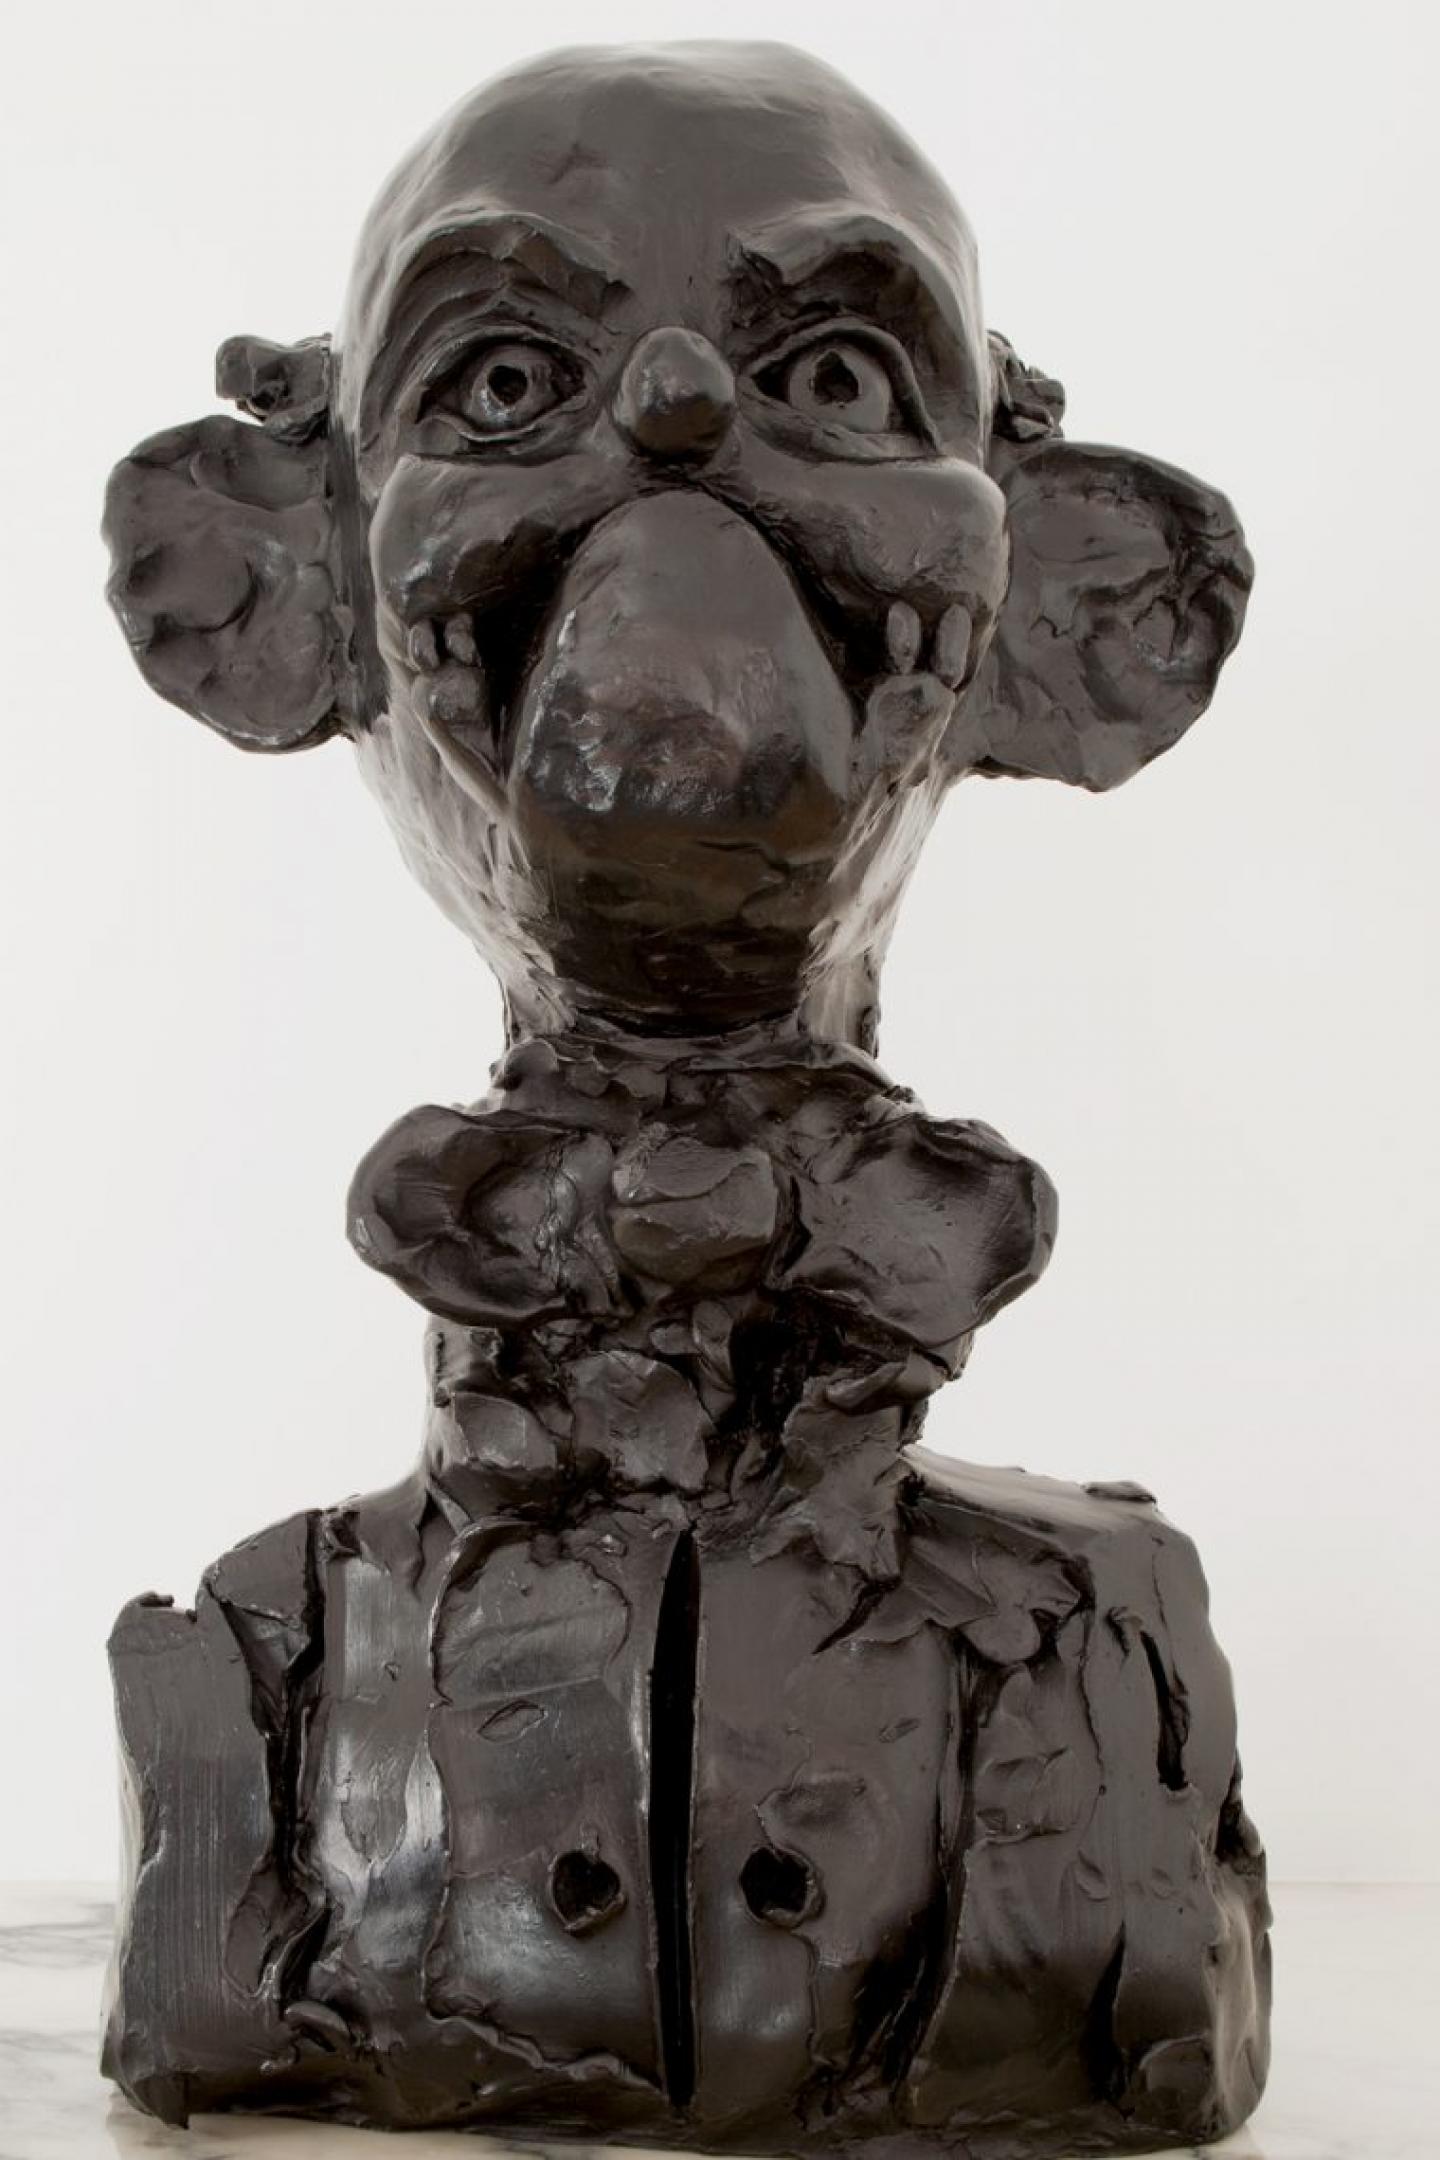 George Condo The Bulgarian Banker 2010 Bronze © George Condo, 2018. Courtesy of the artist and Skarstedt, New York